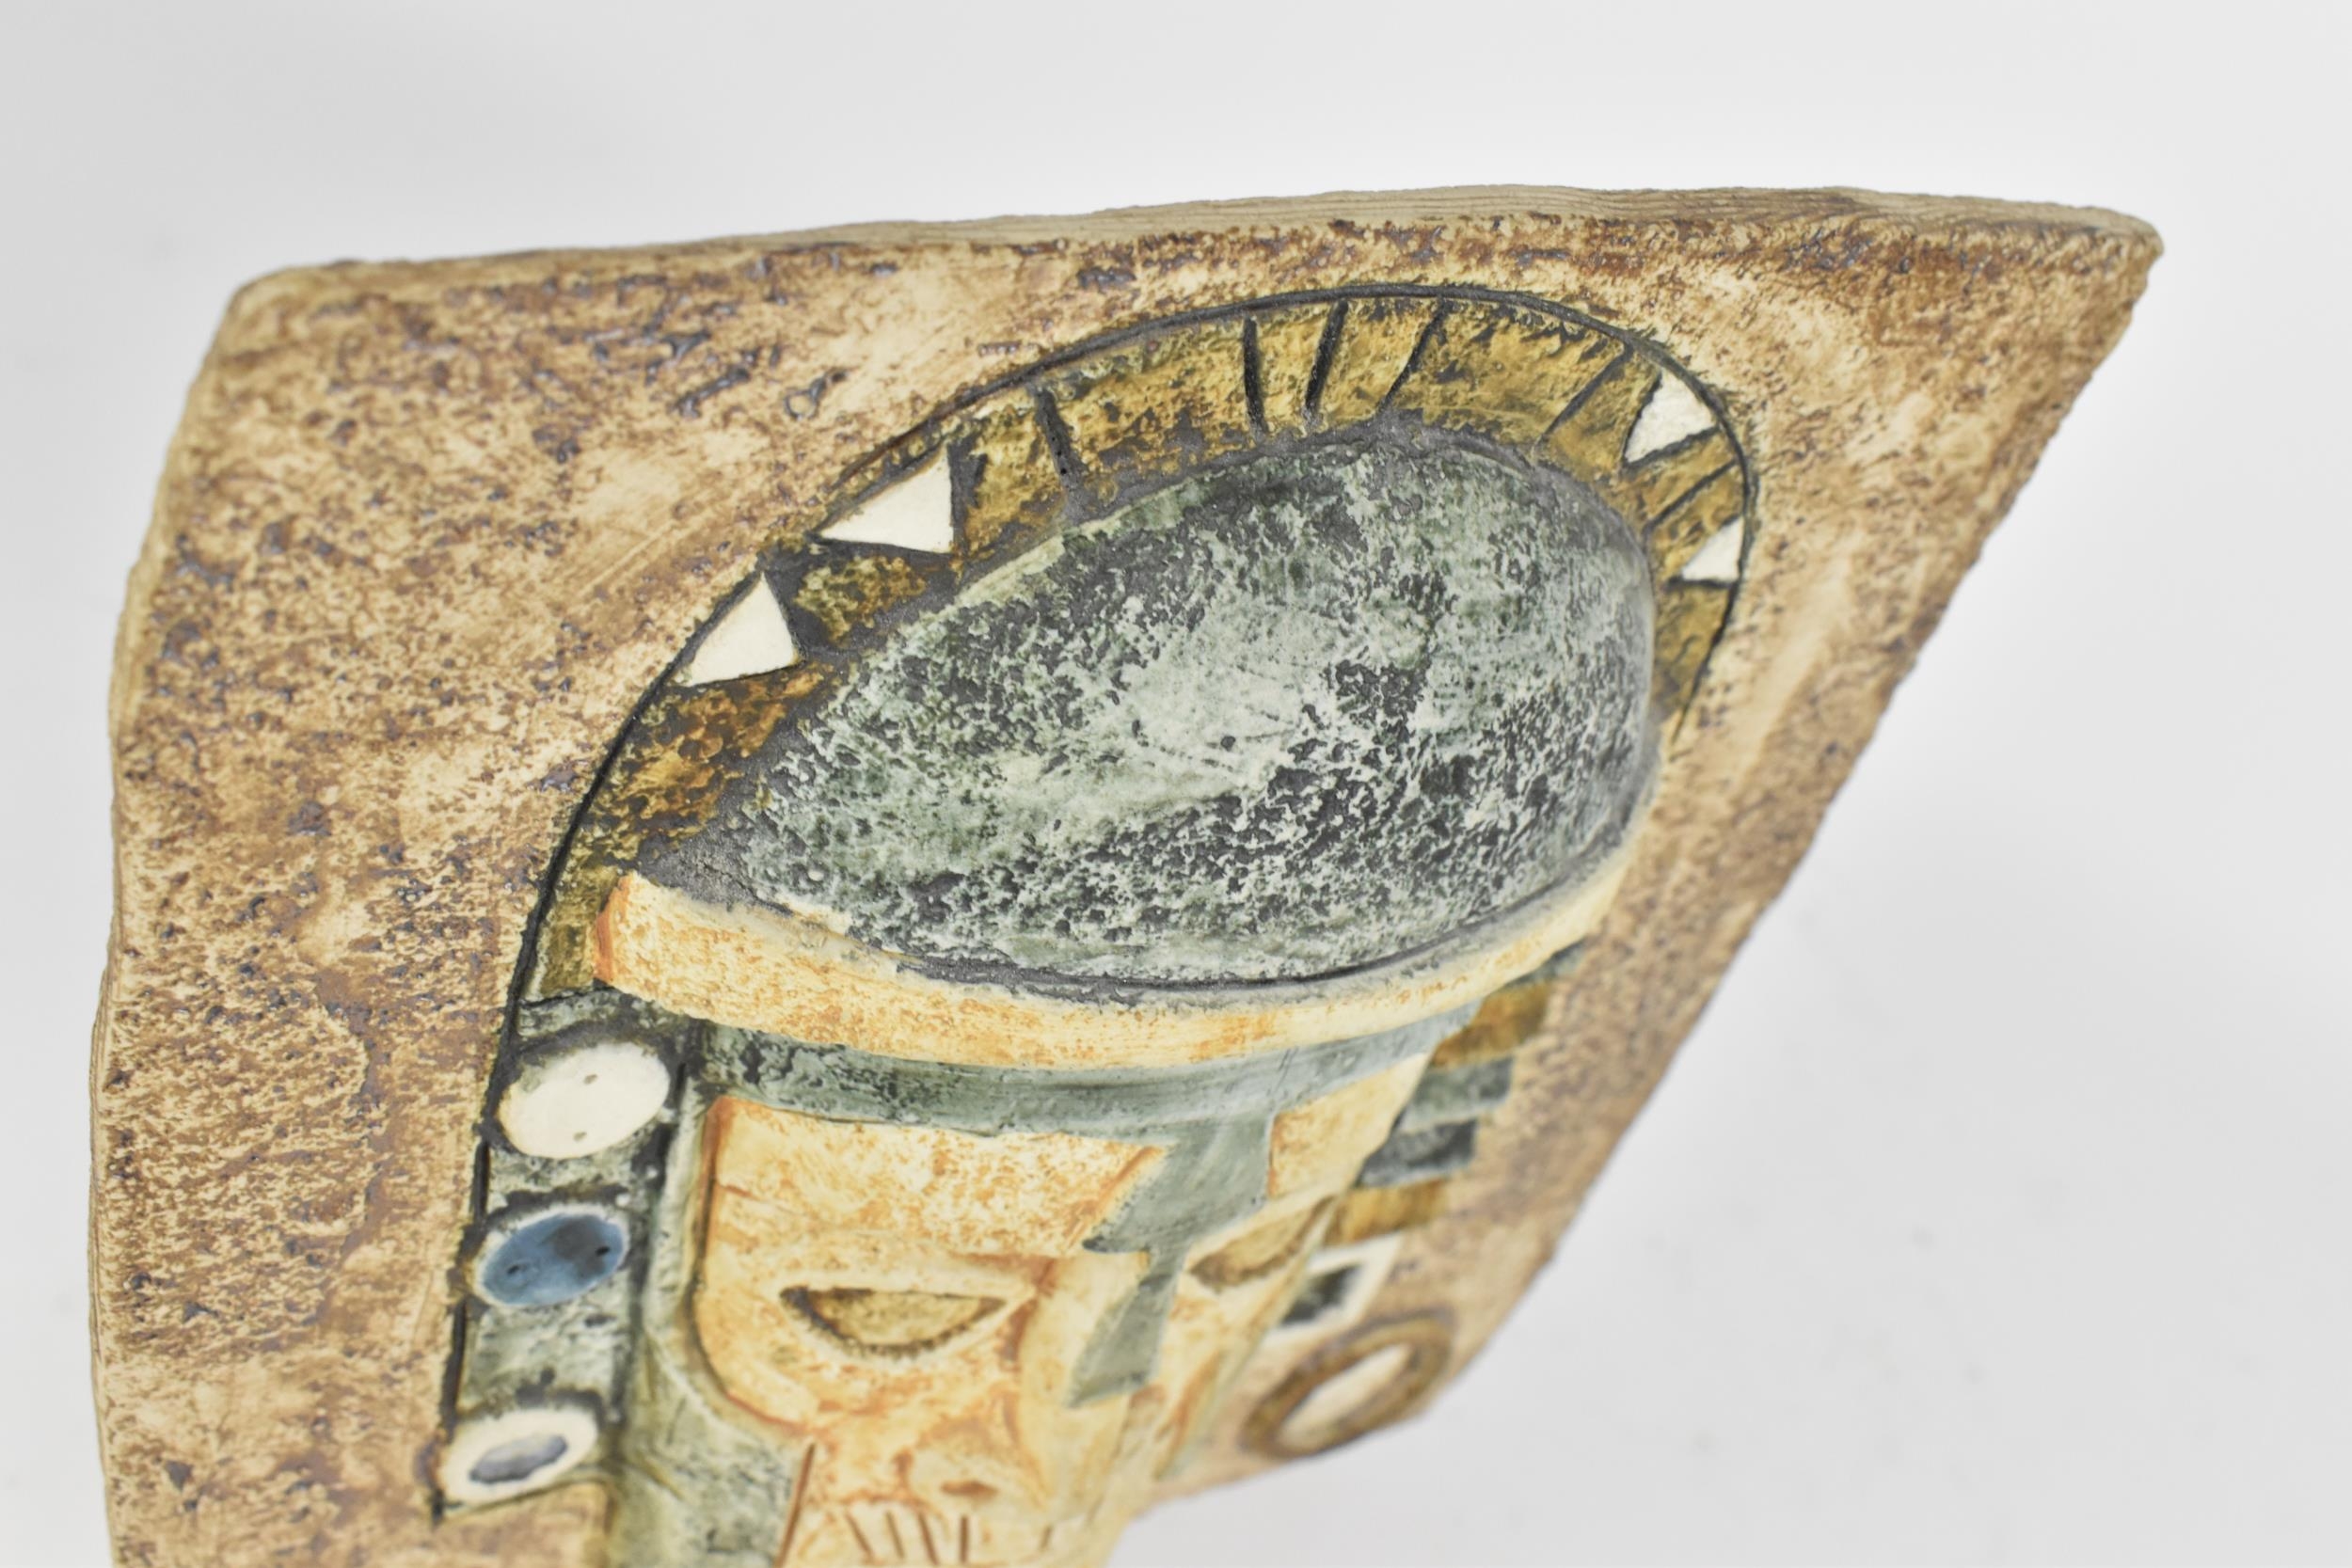 A Troika mask with incised and textured 'Aztec' decoration, monogrammed AW for Annette Walters circa - Image 5 of 7